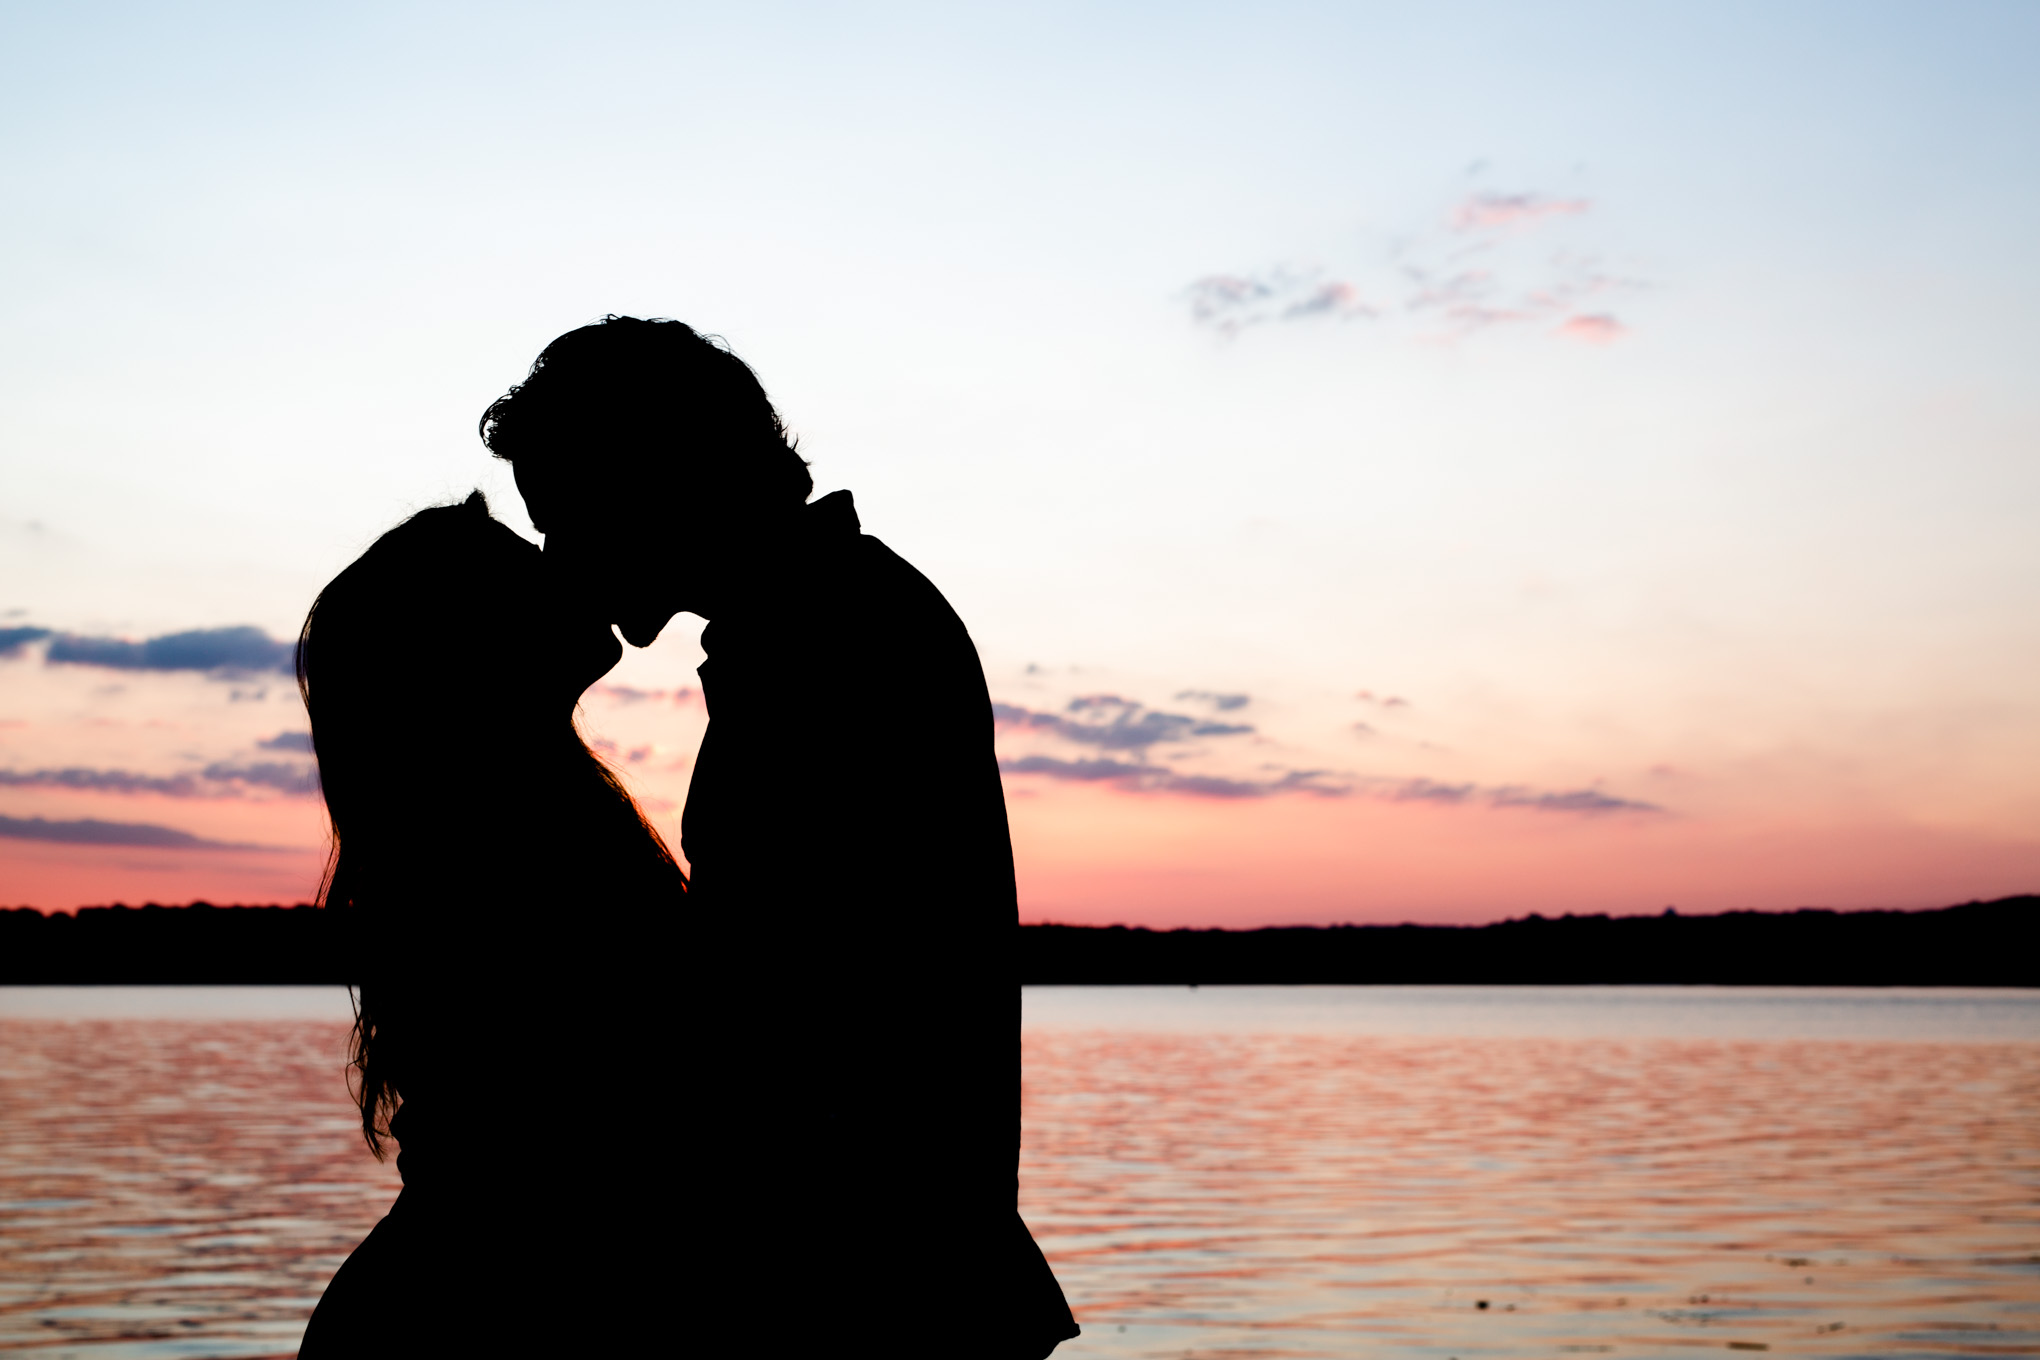 Old Town Alexandria engagement photos, Alexandria engagement photos, Old Town Alexandria photos, Old Town Alexandria, Alexandria engagement photos, Alexandria Virginia, classic engagement photos, historic town engagement photos, engagement photos, Rachel E.H. Photography, sunrise, silhouettes, couple kissing